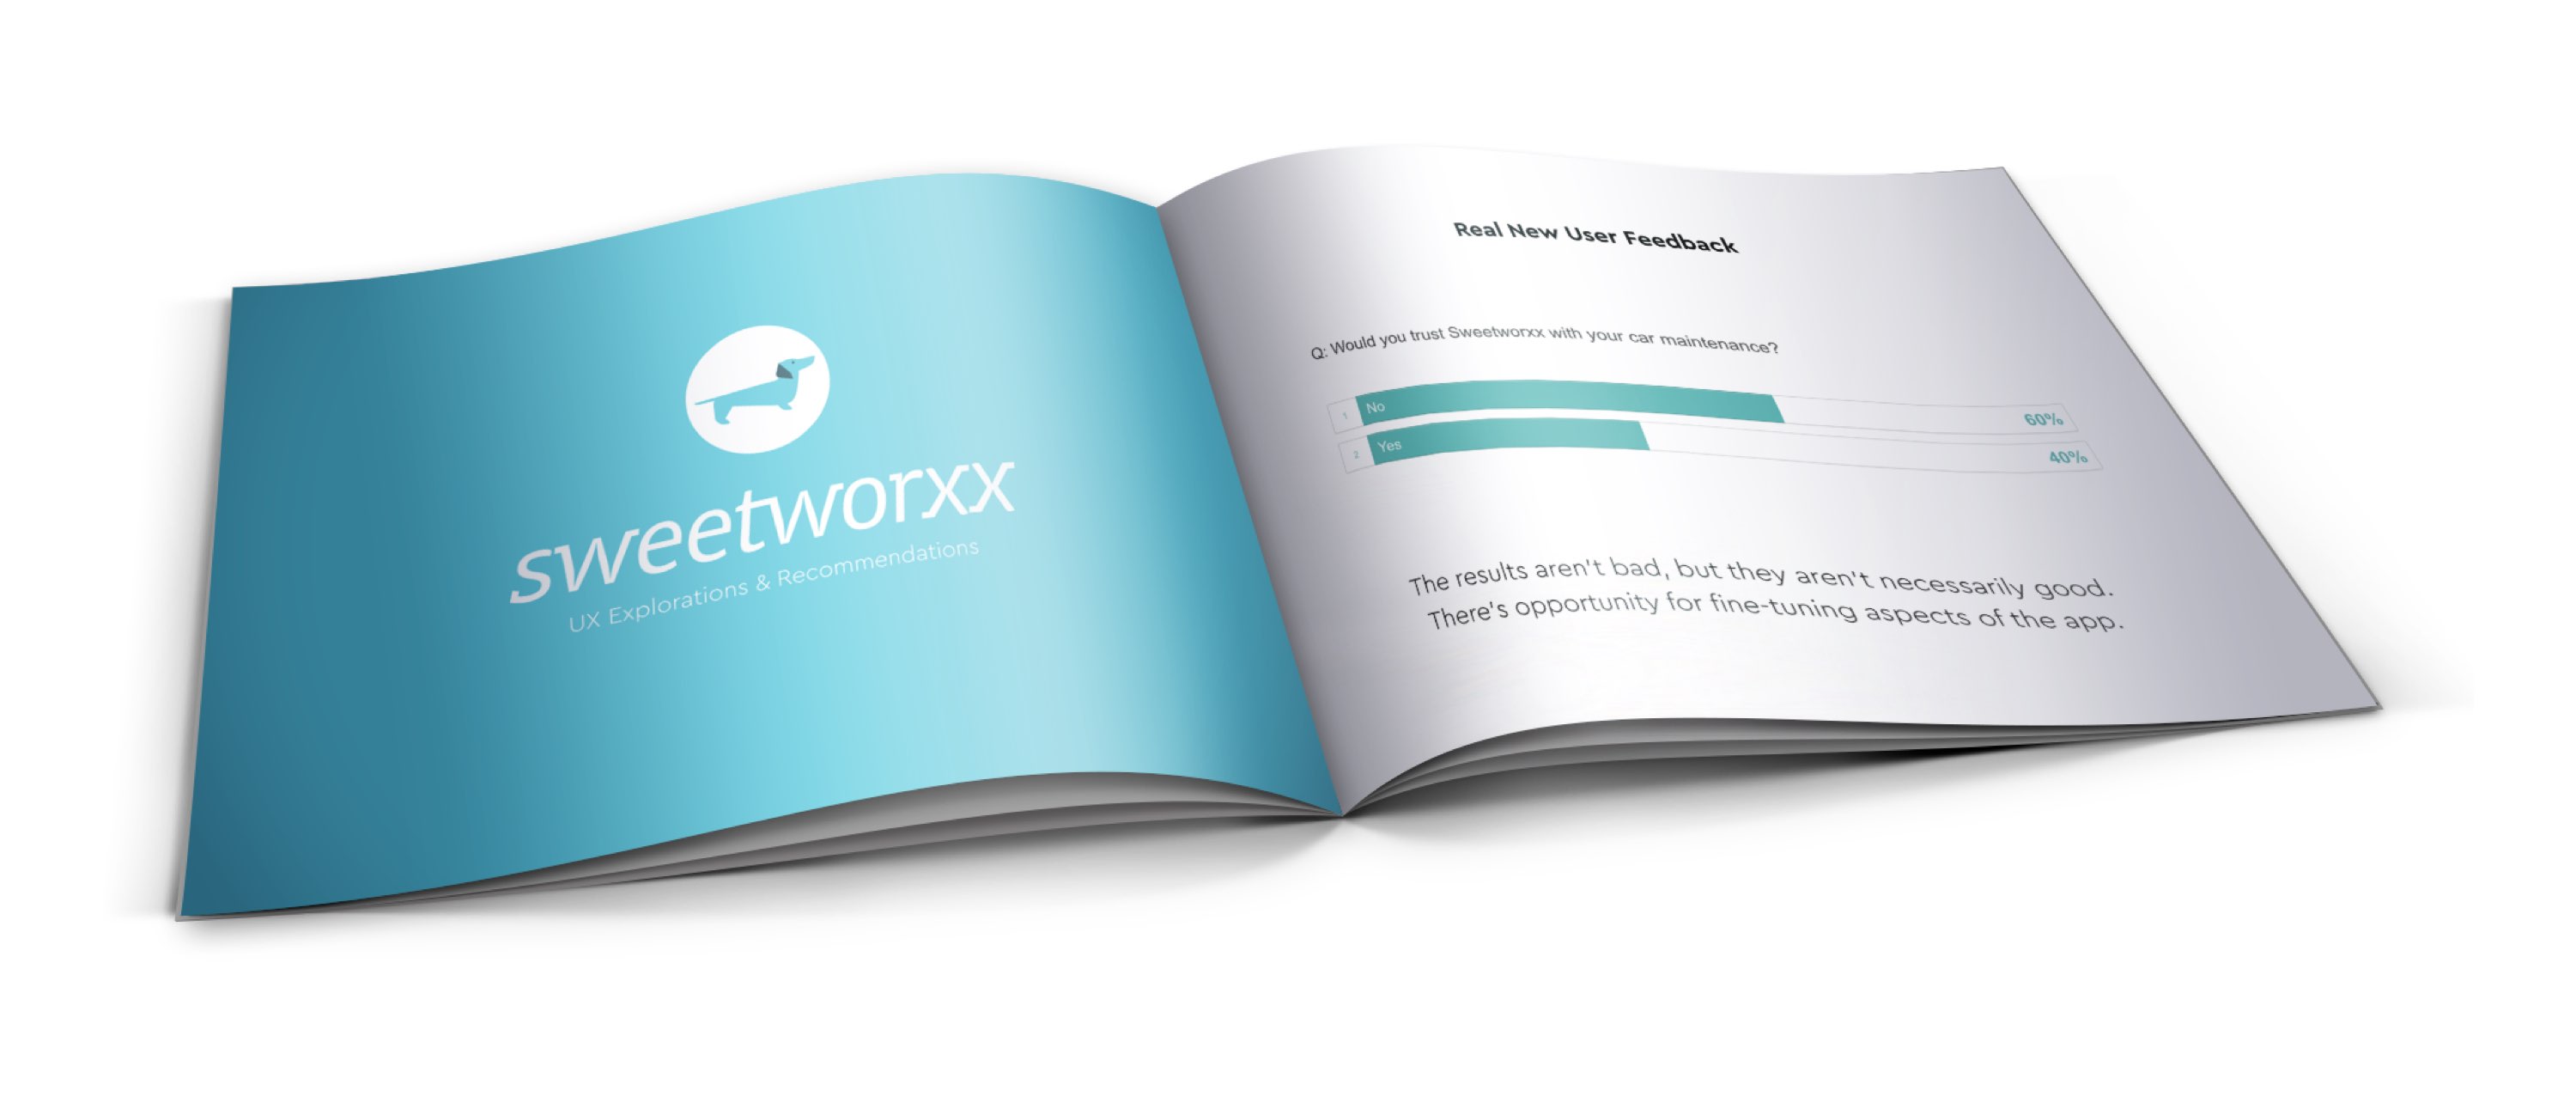 UX research report for Sweetworxx